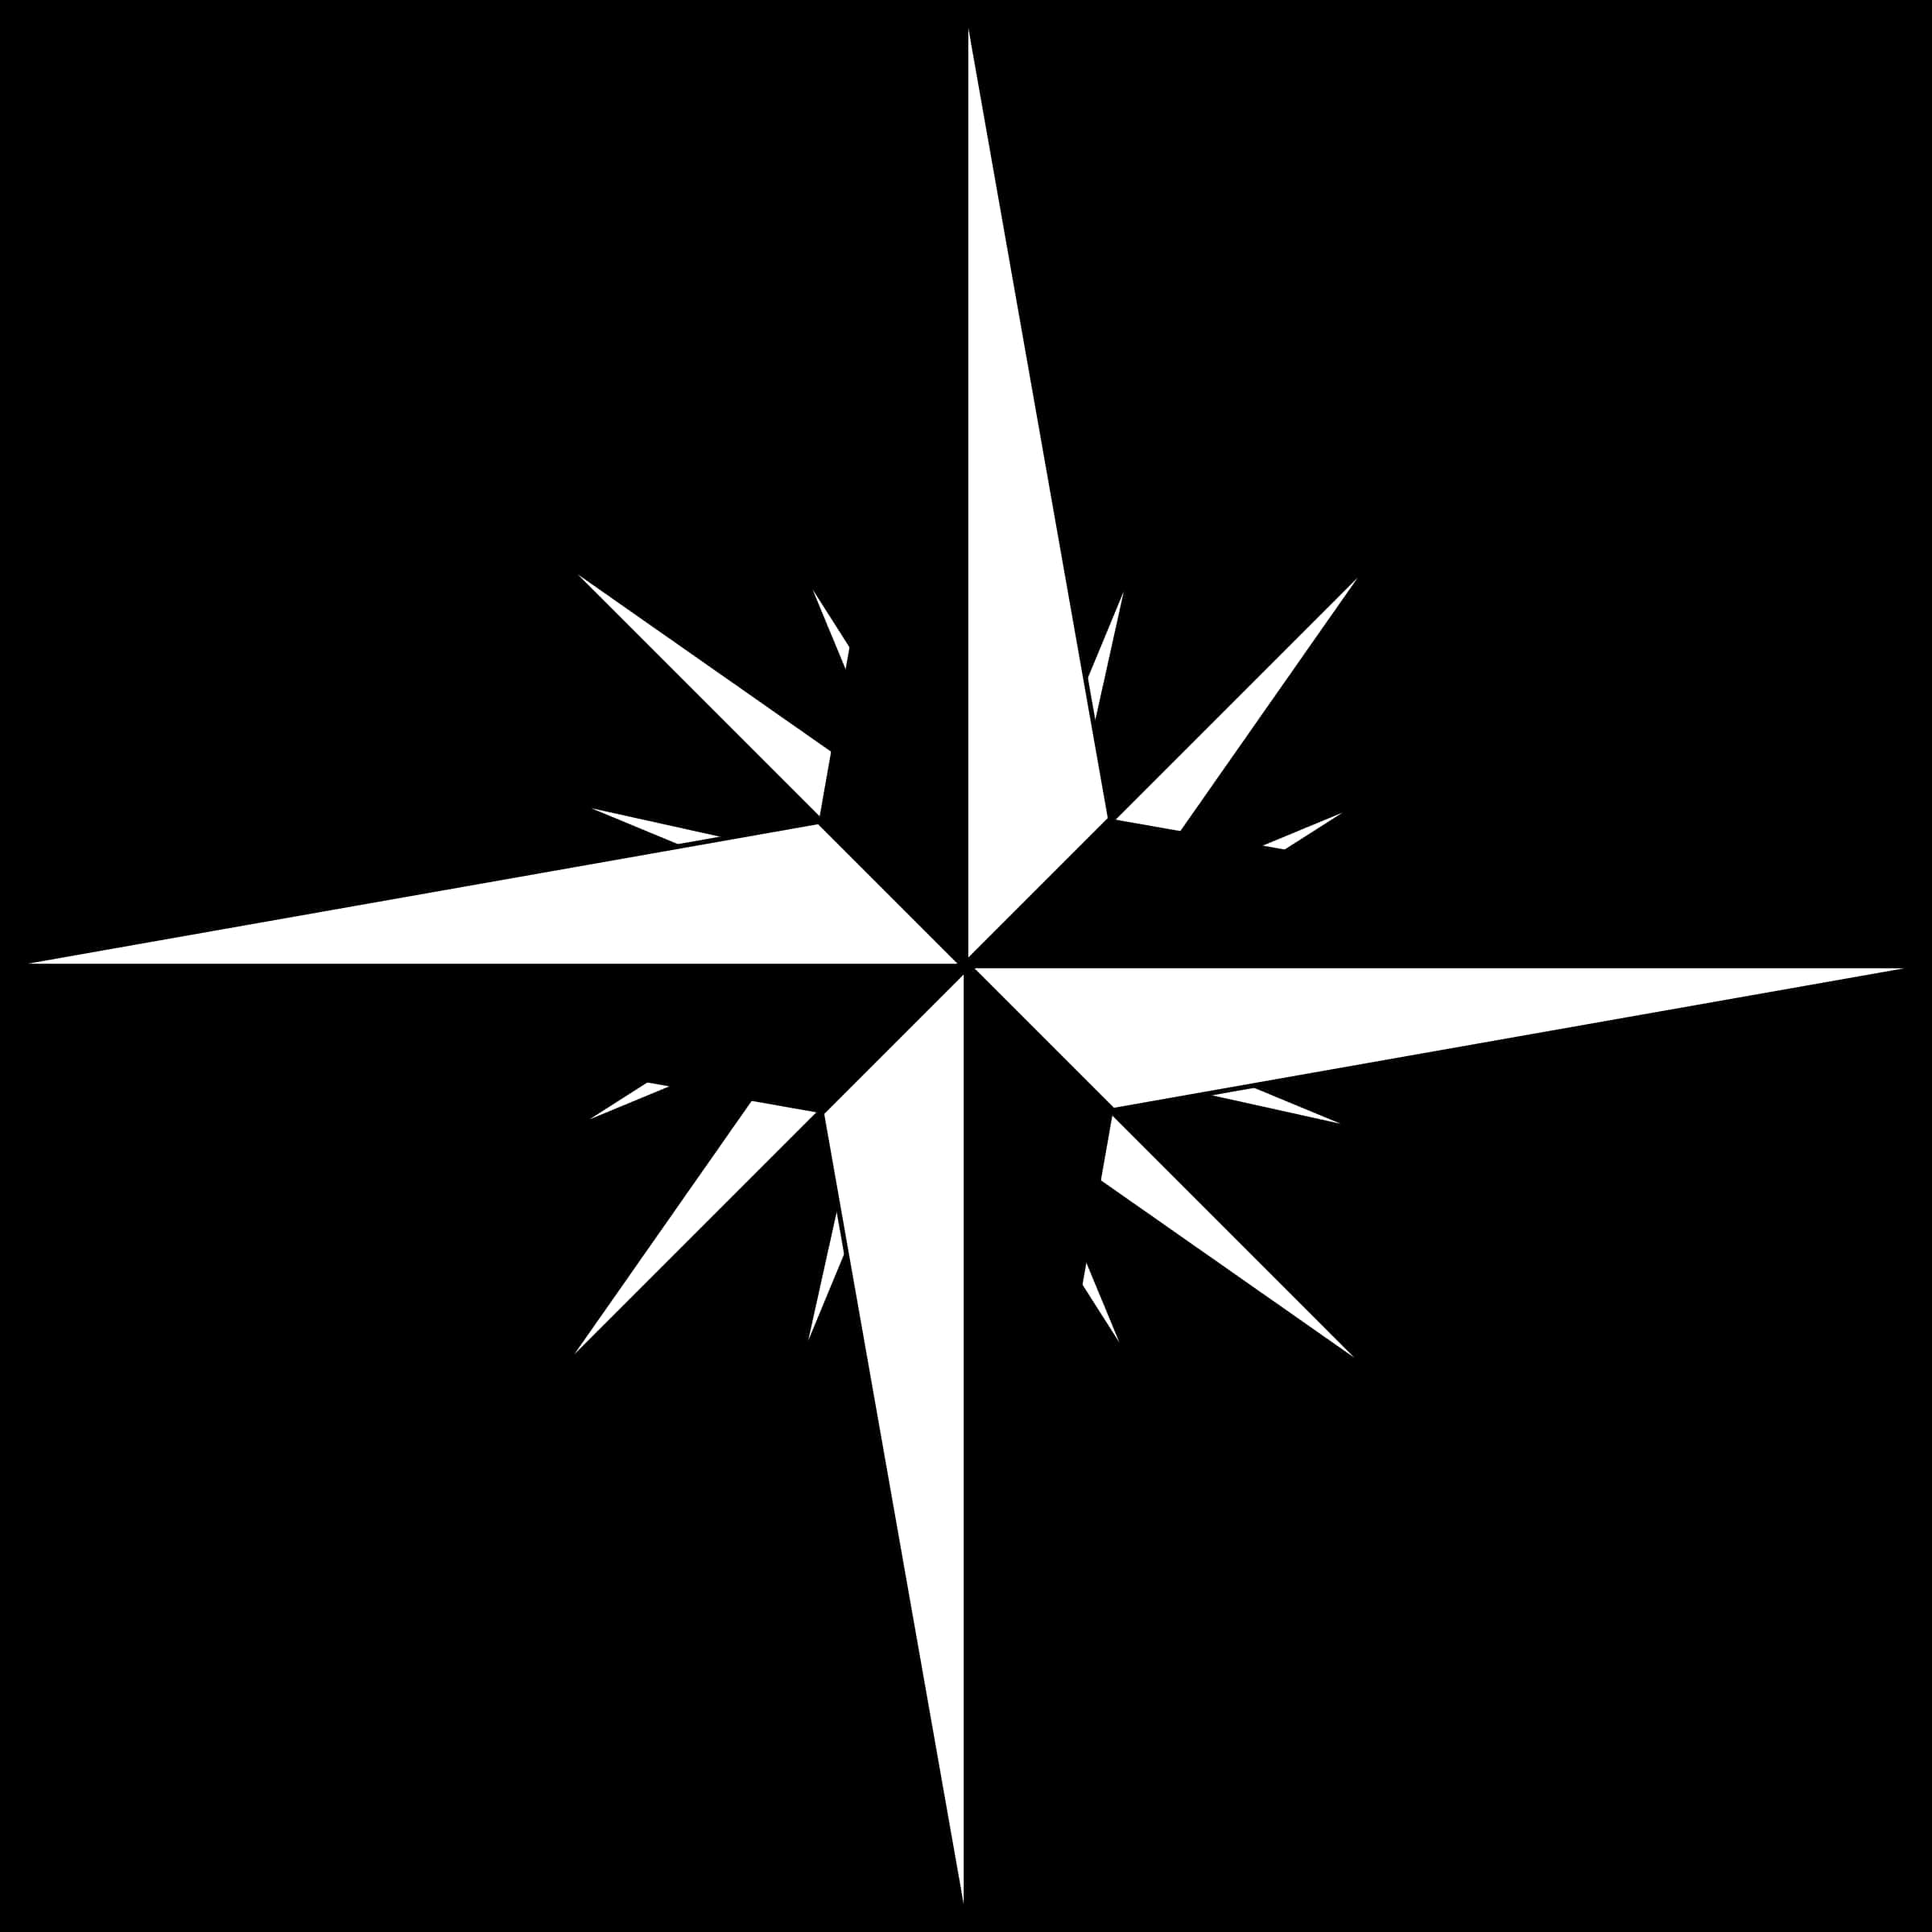 Compass Rose Graphic Blackand White